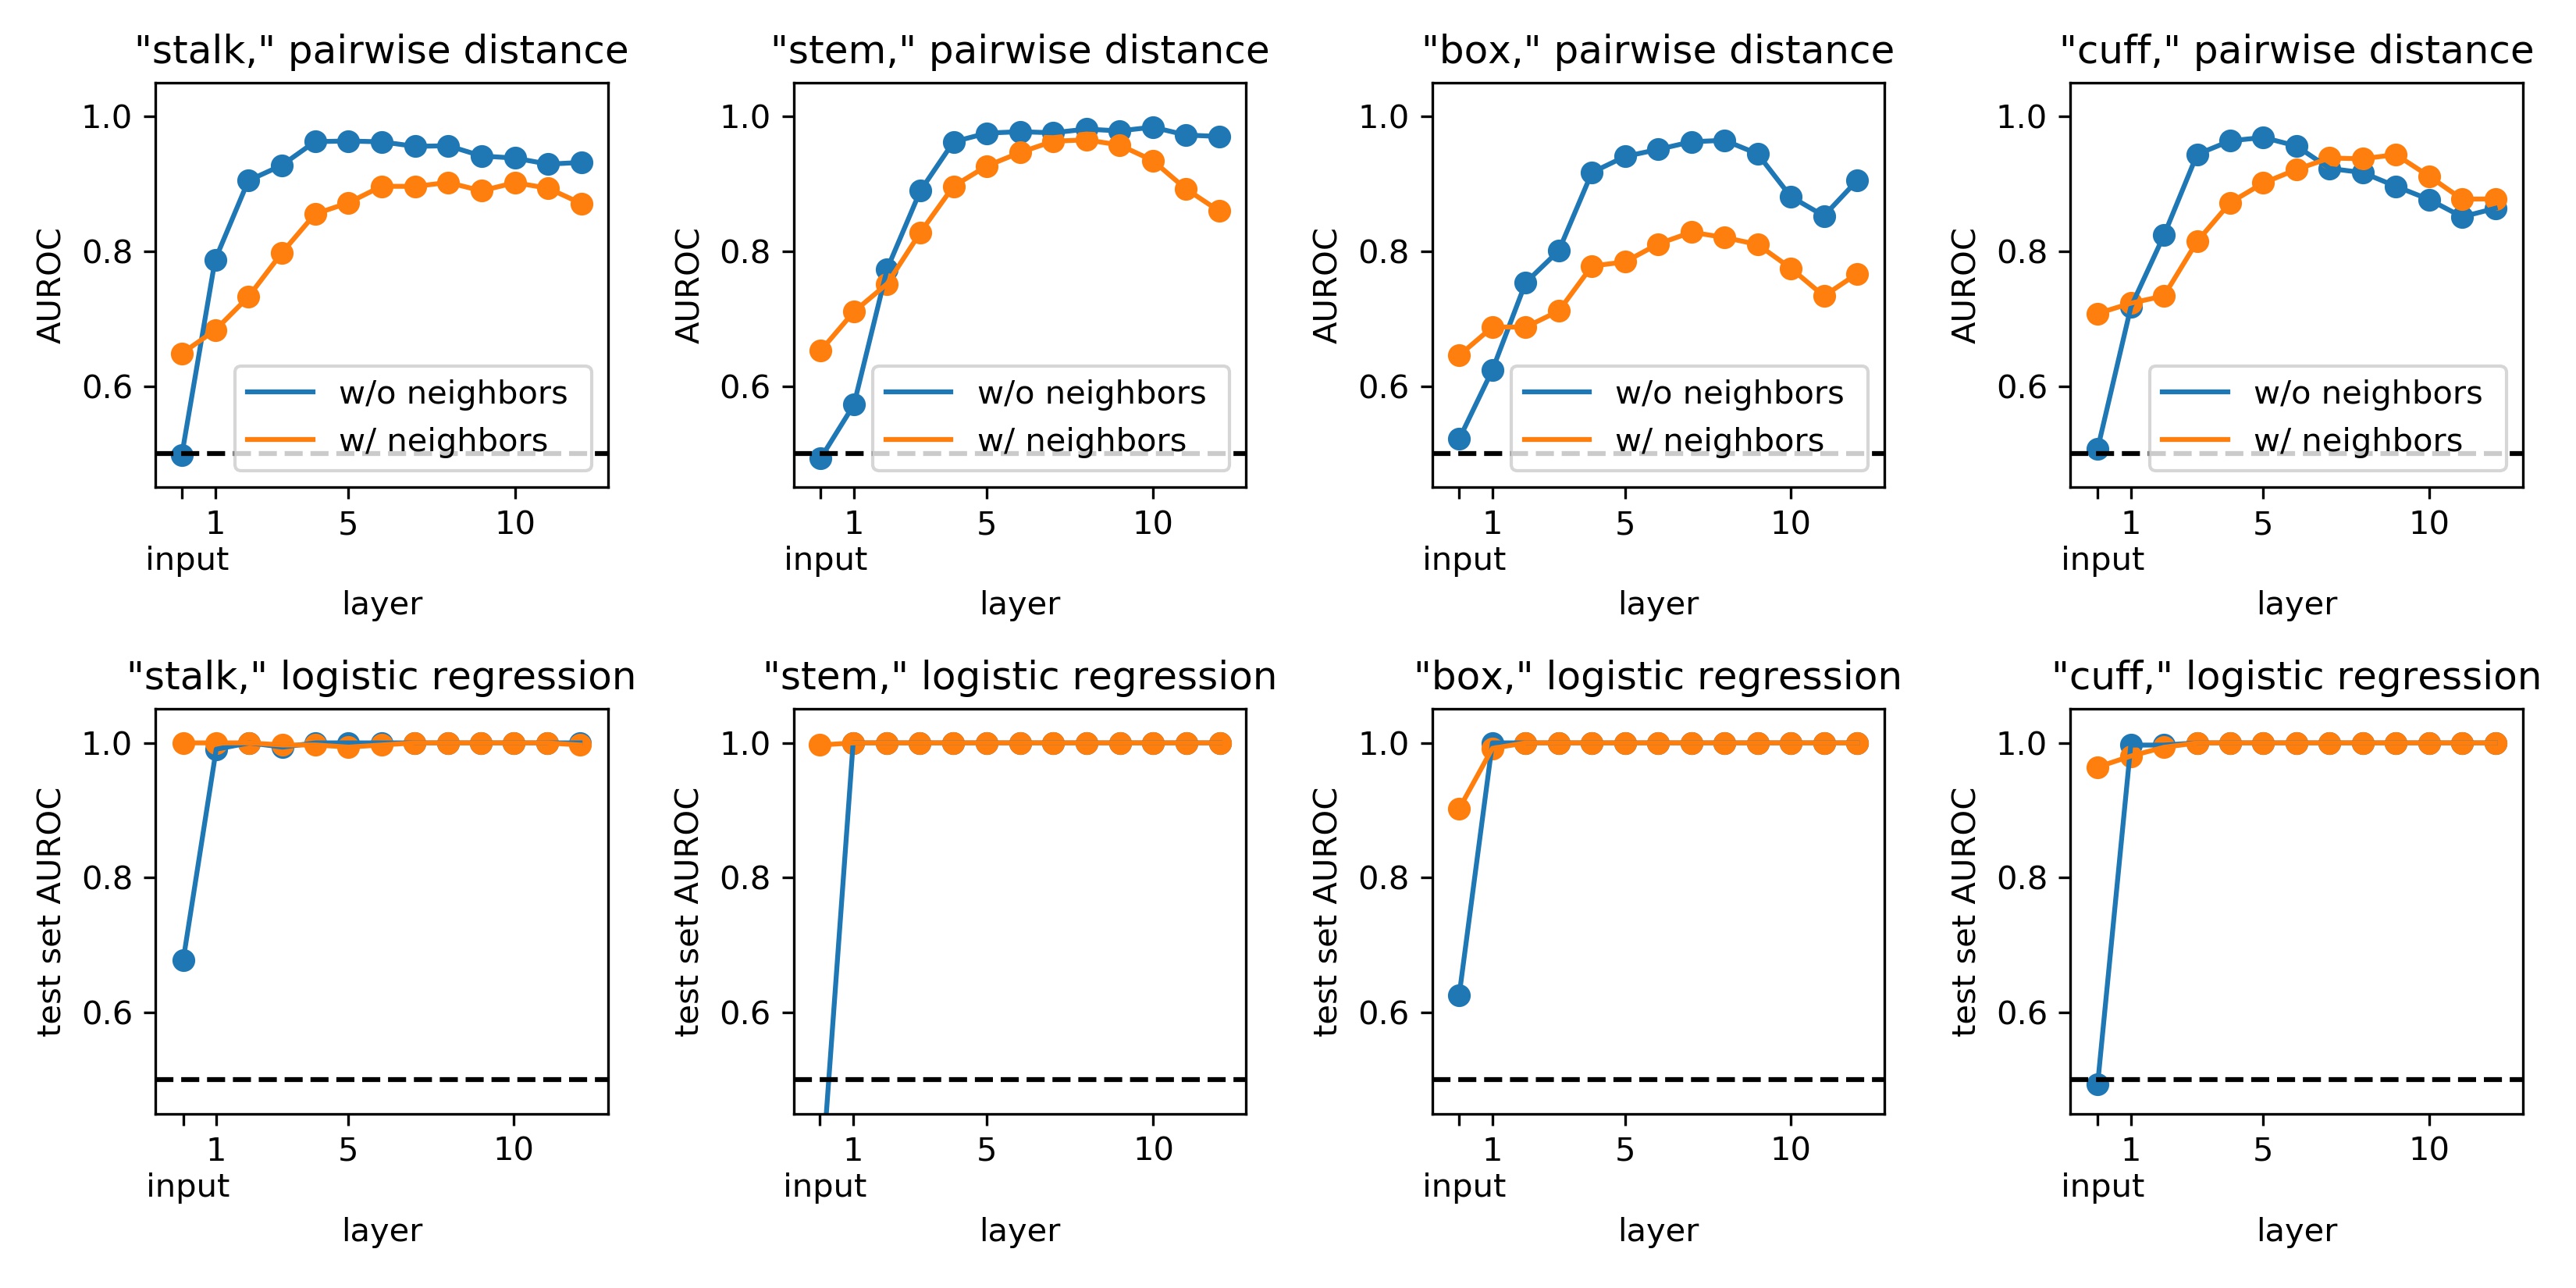 Linear separability of other homonym representations